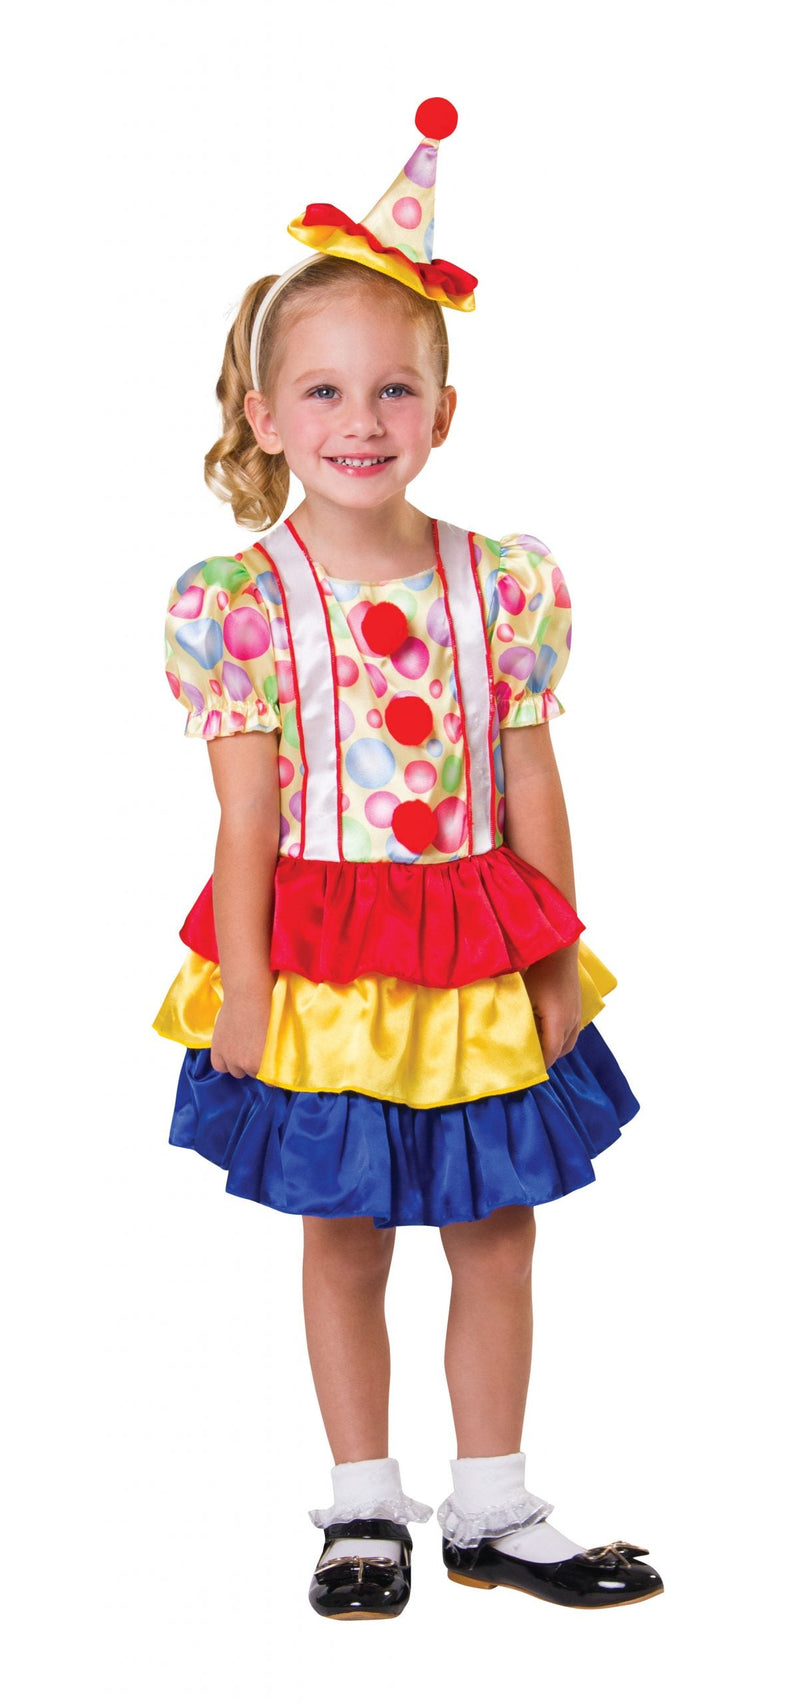 Clown Cutie Toddler Childrens Costume Female To Fit Child Of Height 90cm 100cm_1 CC007